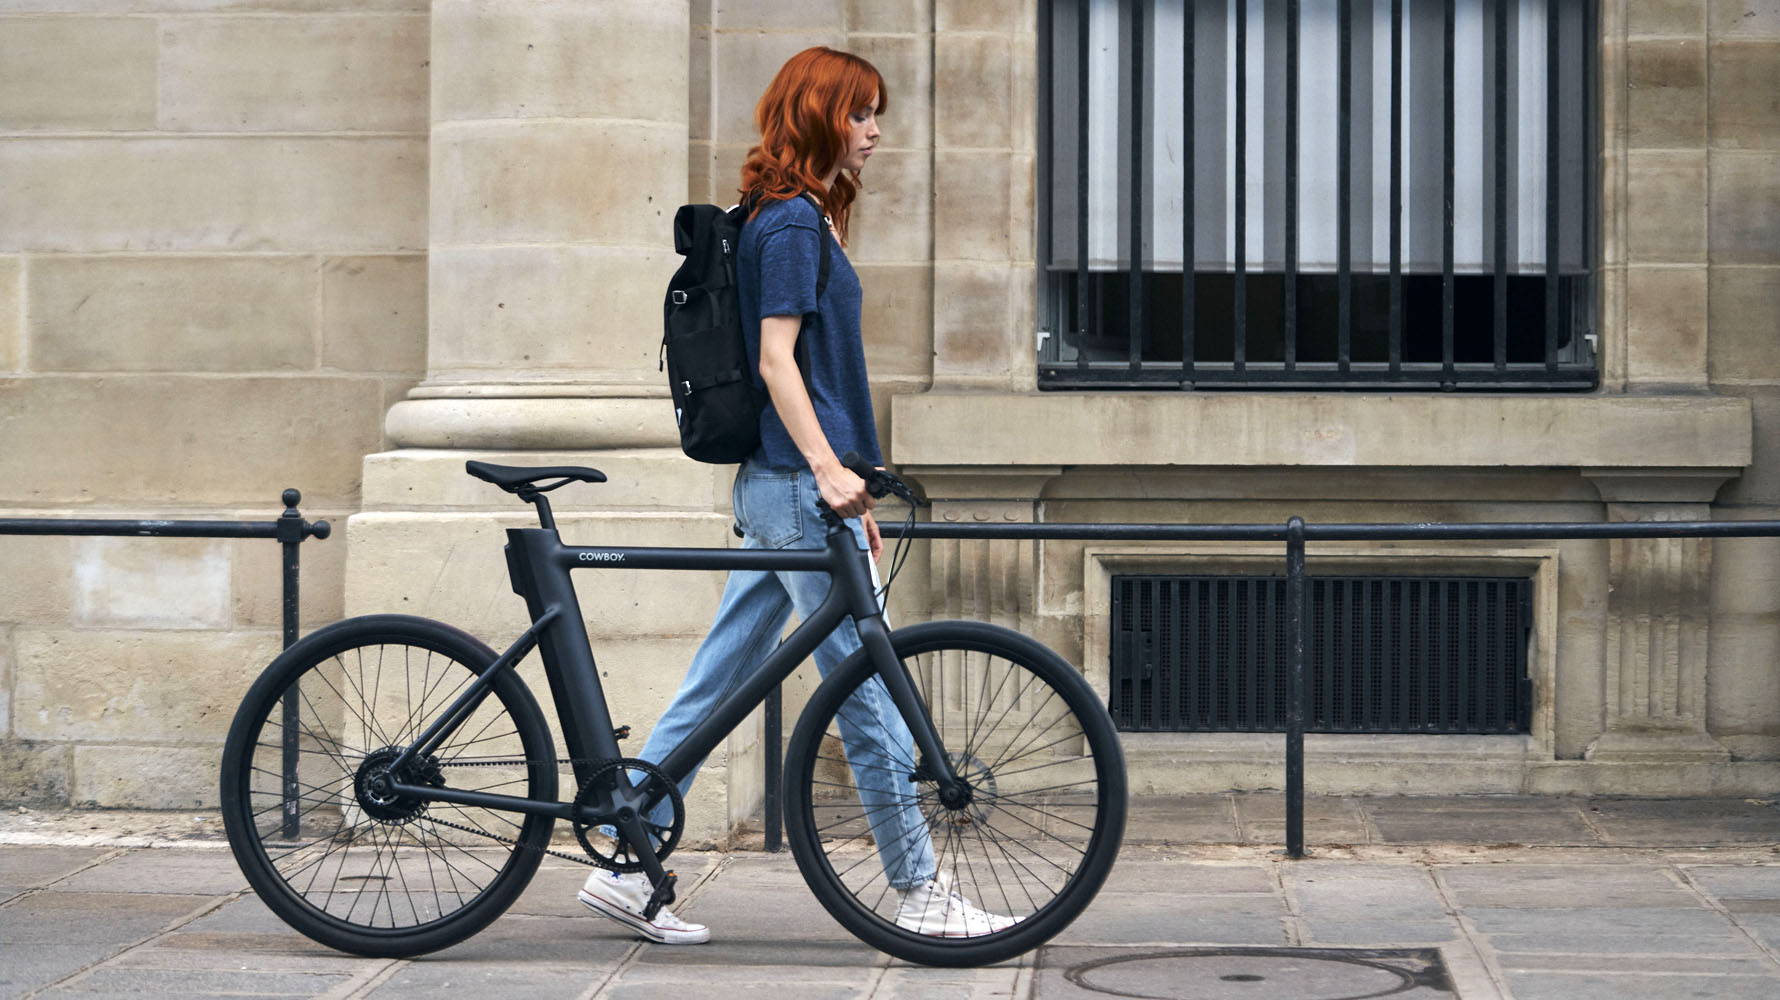 Off The Chain: 10 Innovative Bicycle Designs